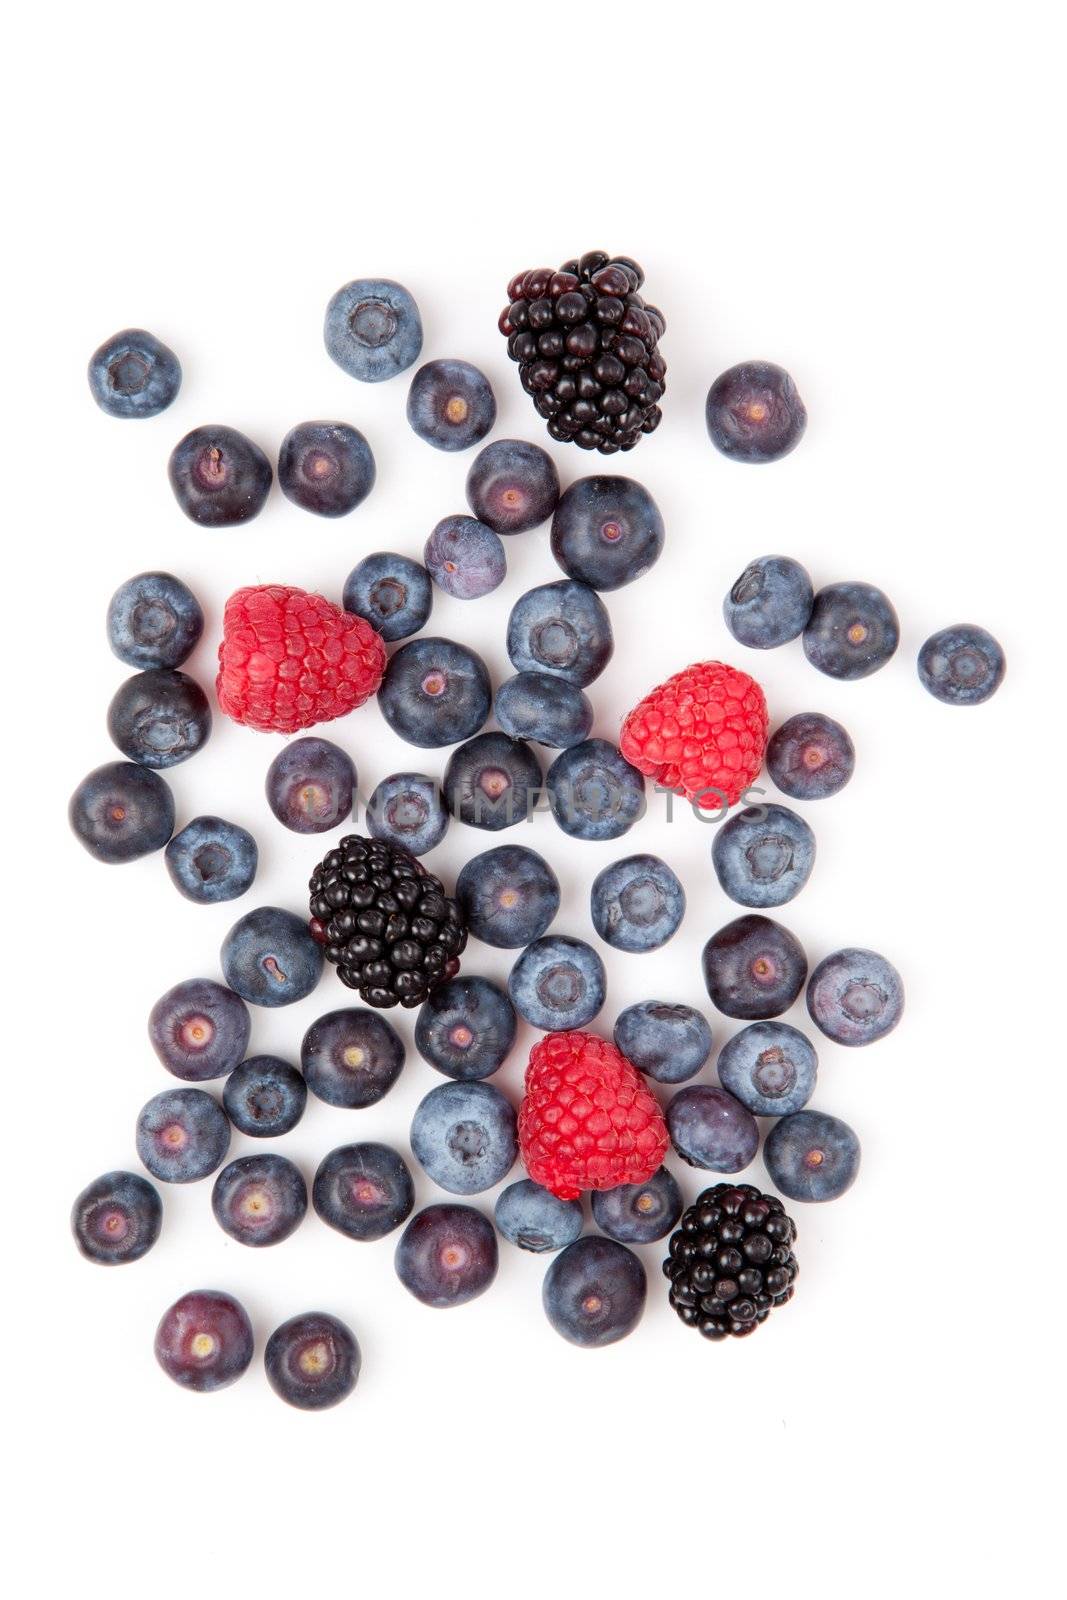 Raspberries and blueberries and blackberries  against a white background